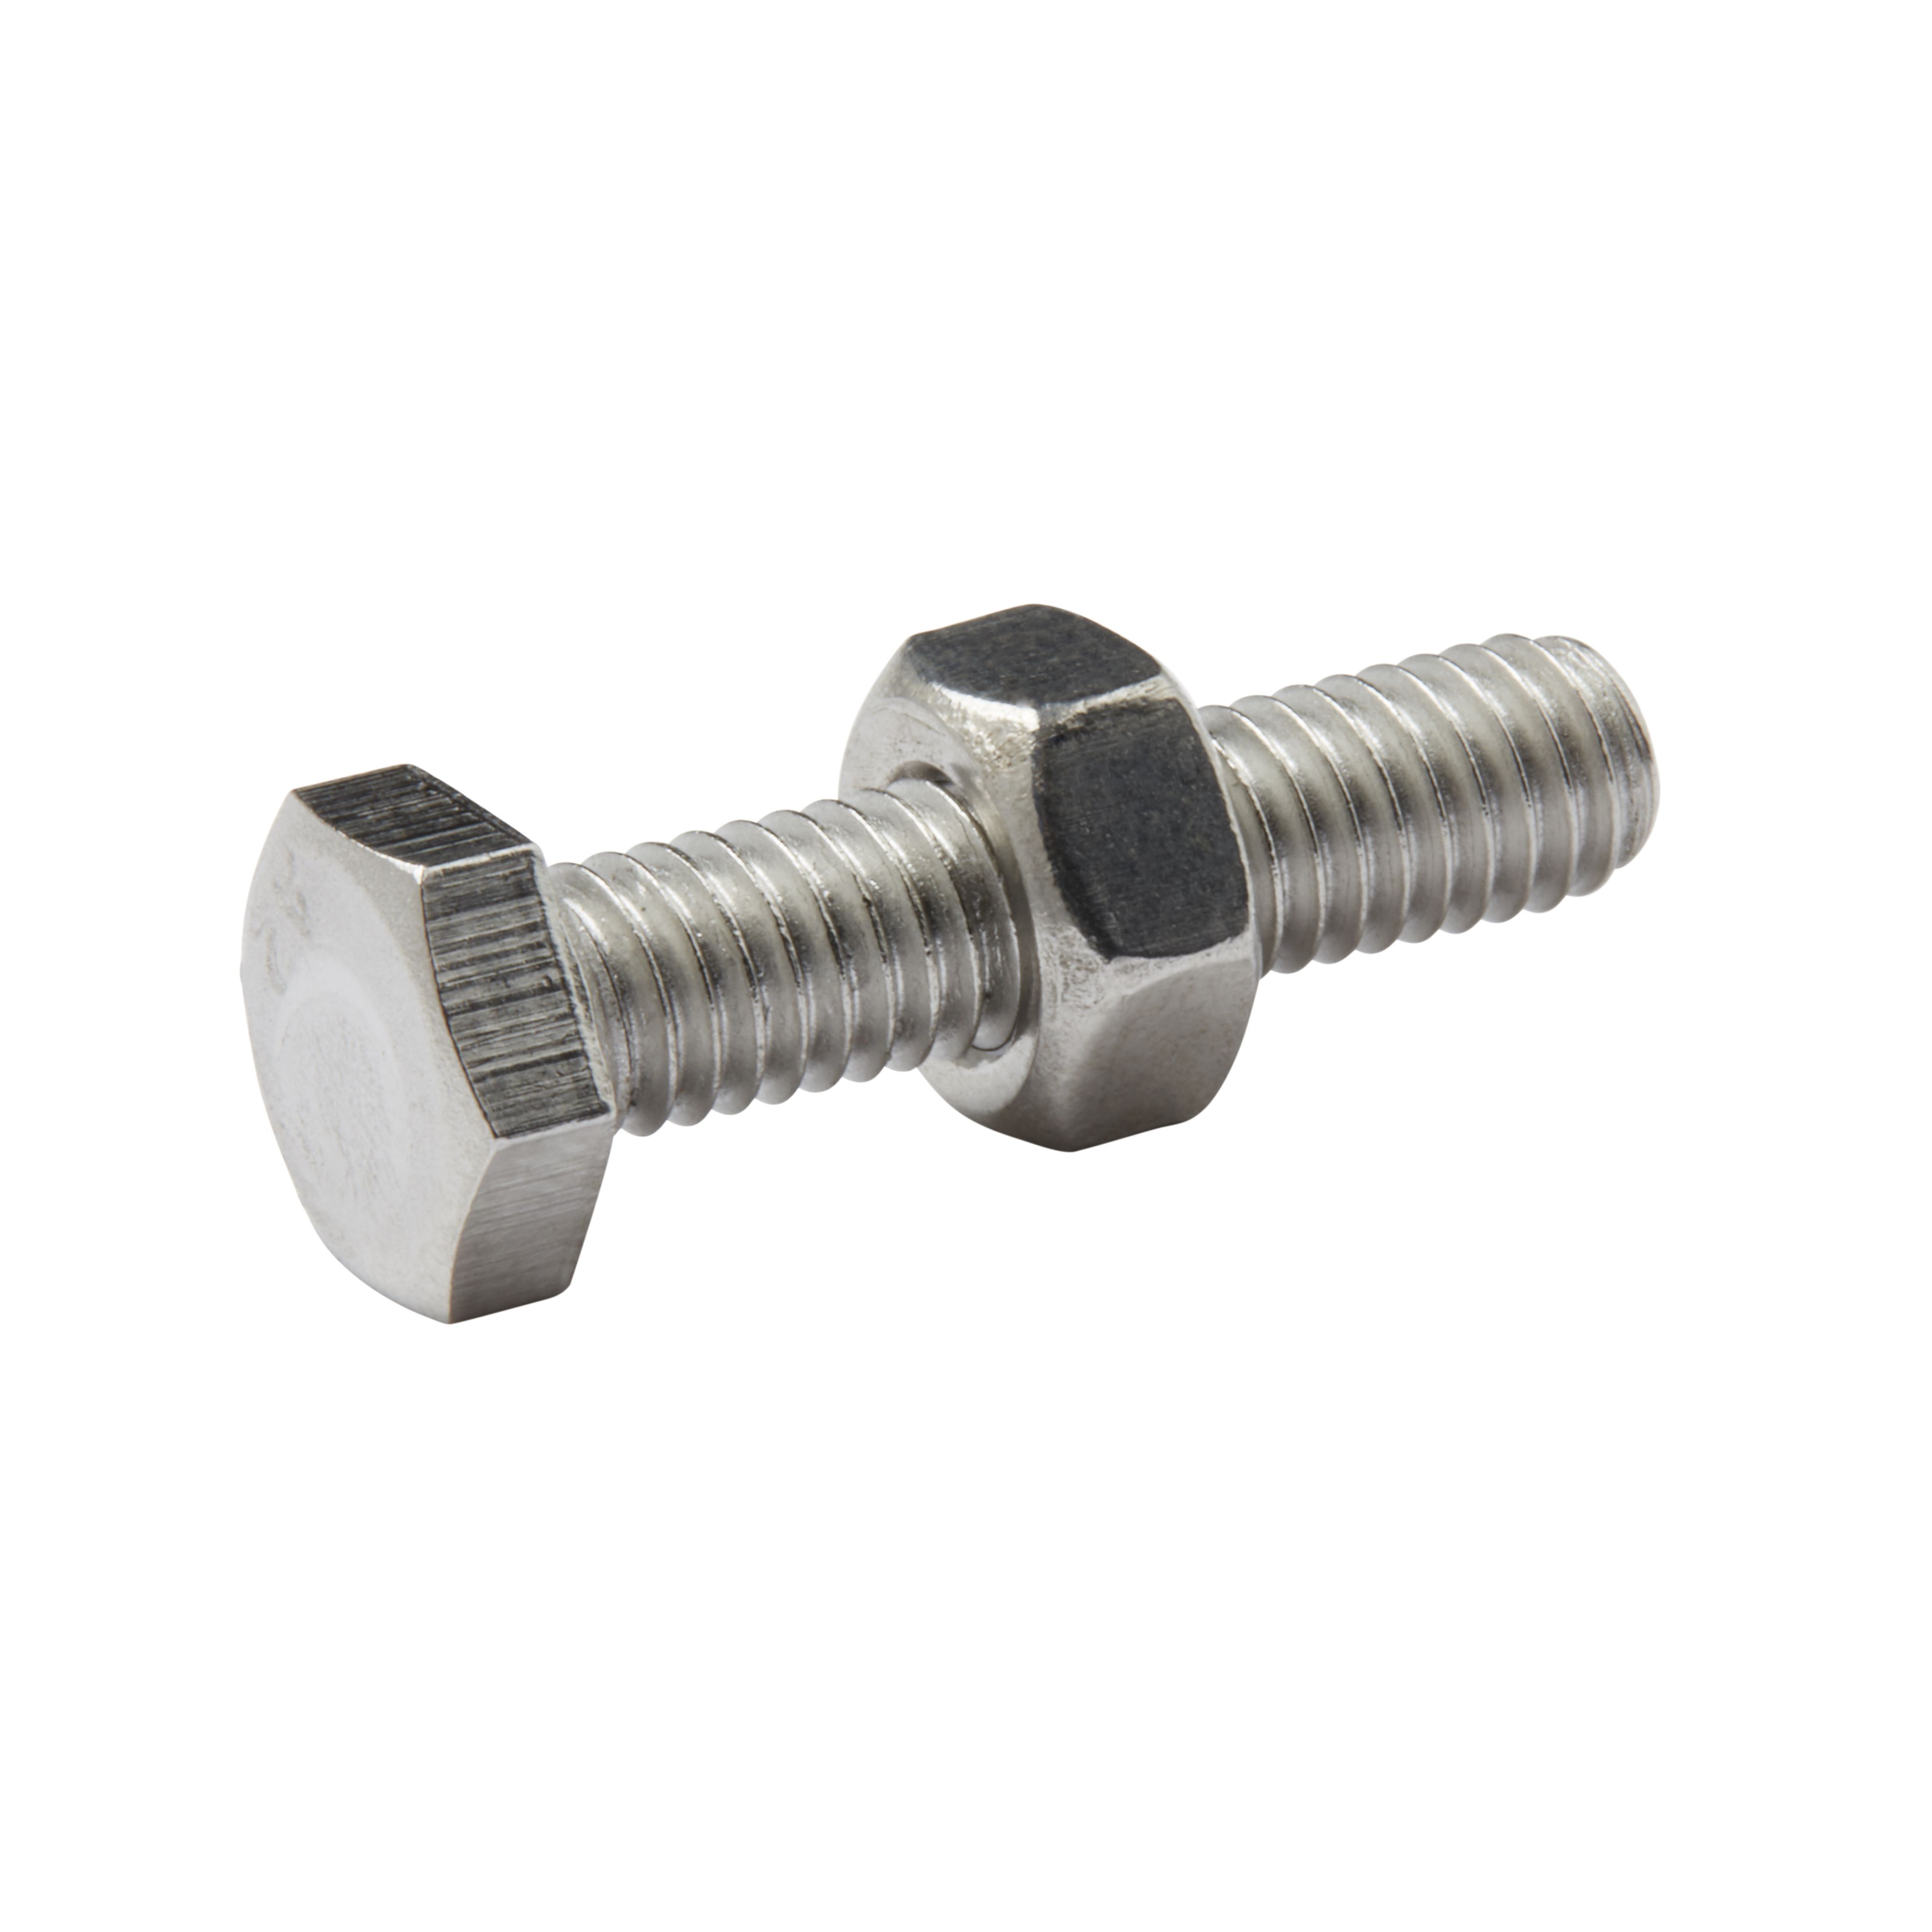 Diall M6 Hex Stainless steel Bolt & nut (L)25mm (Dia)6mm, Pack of 10